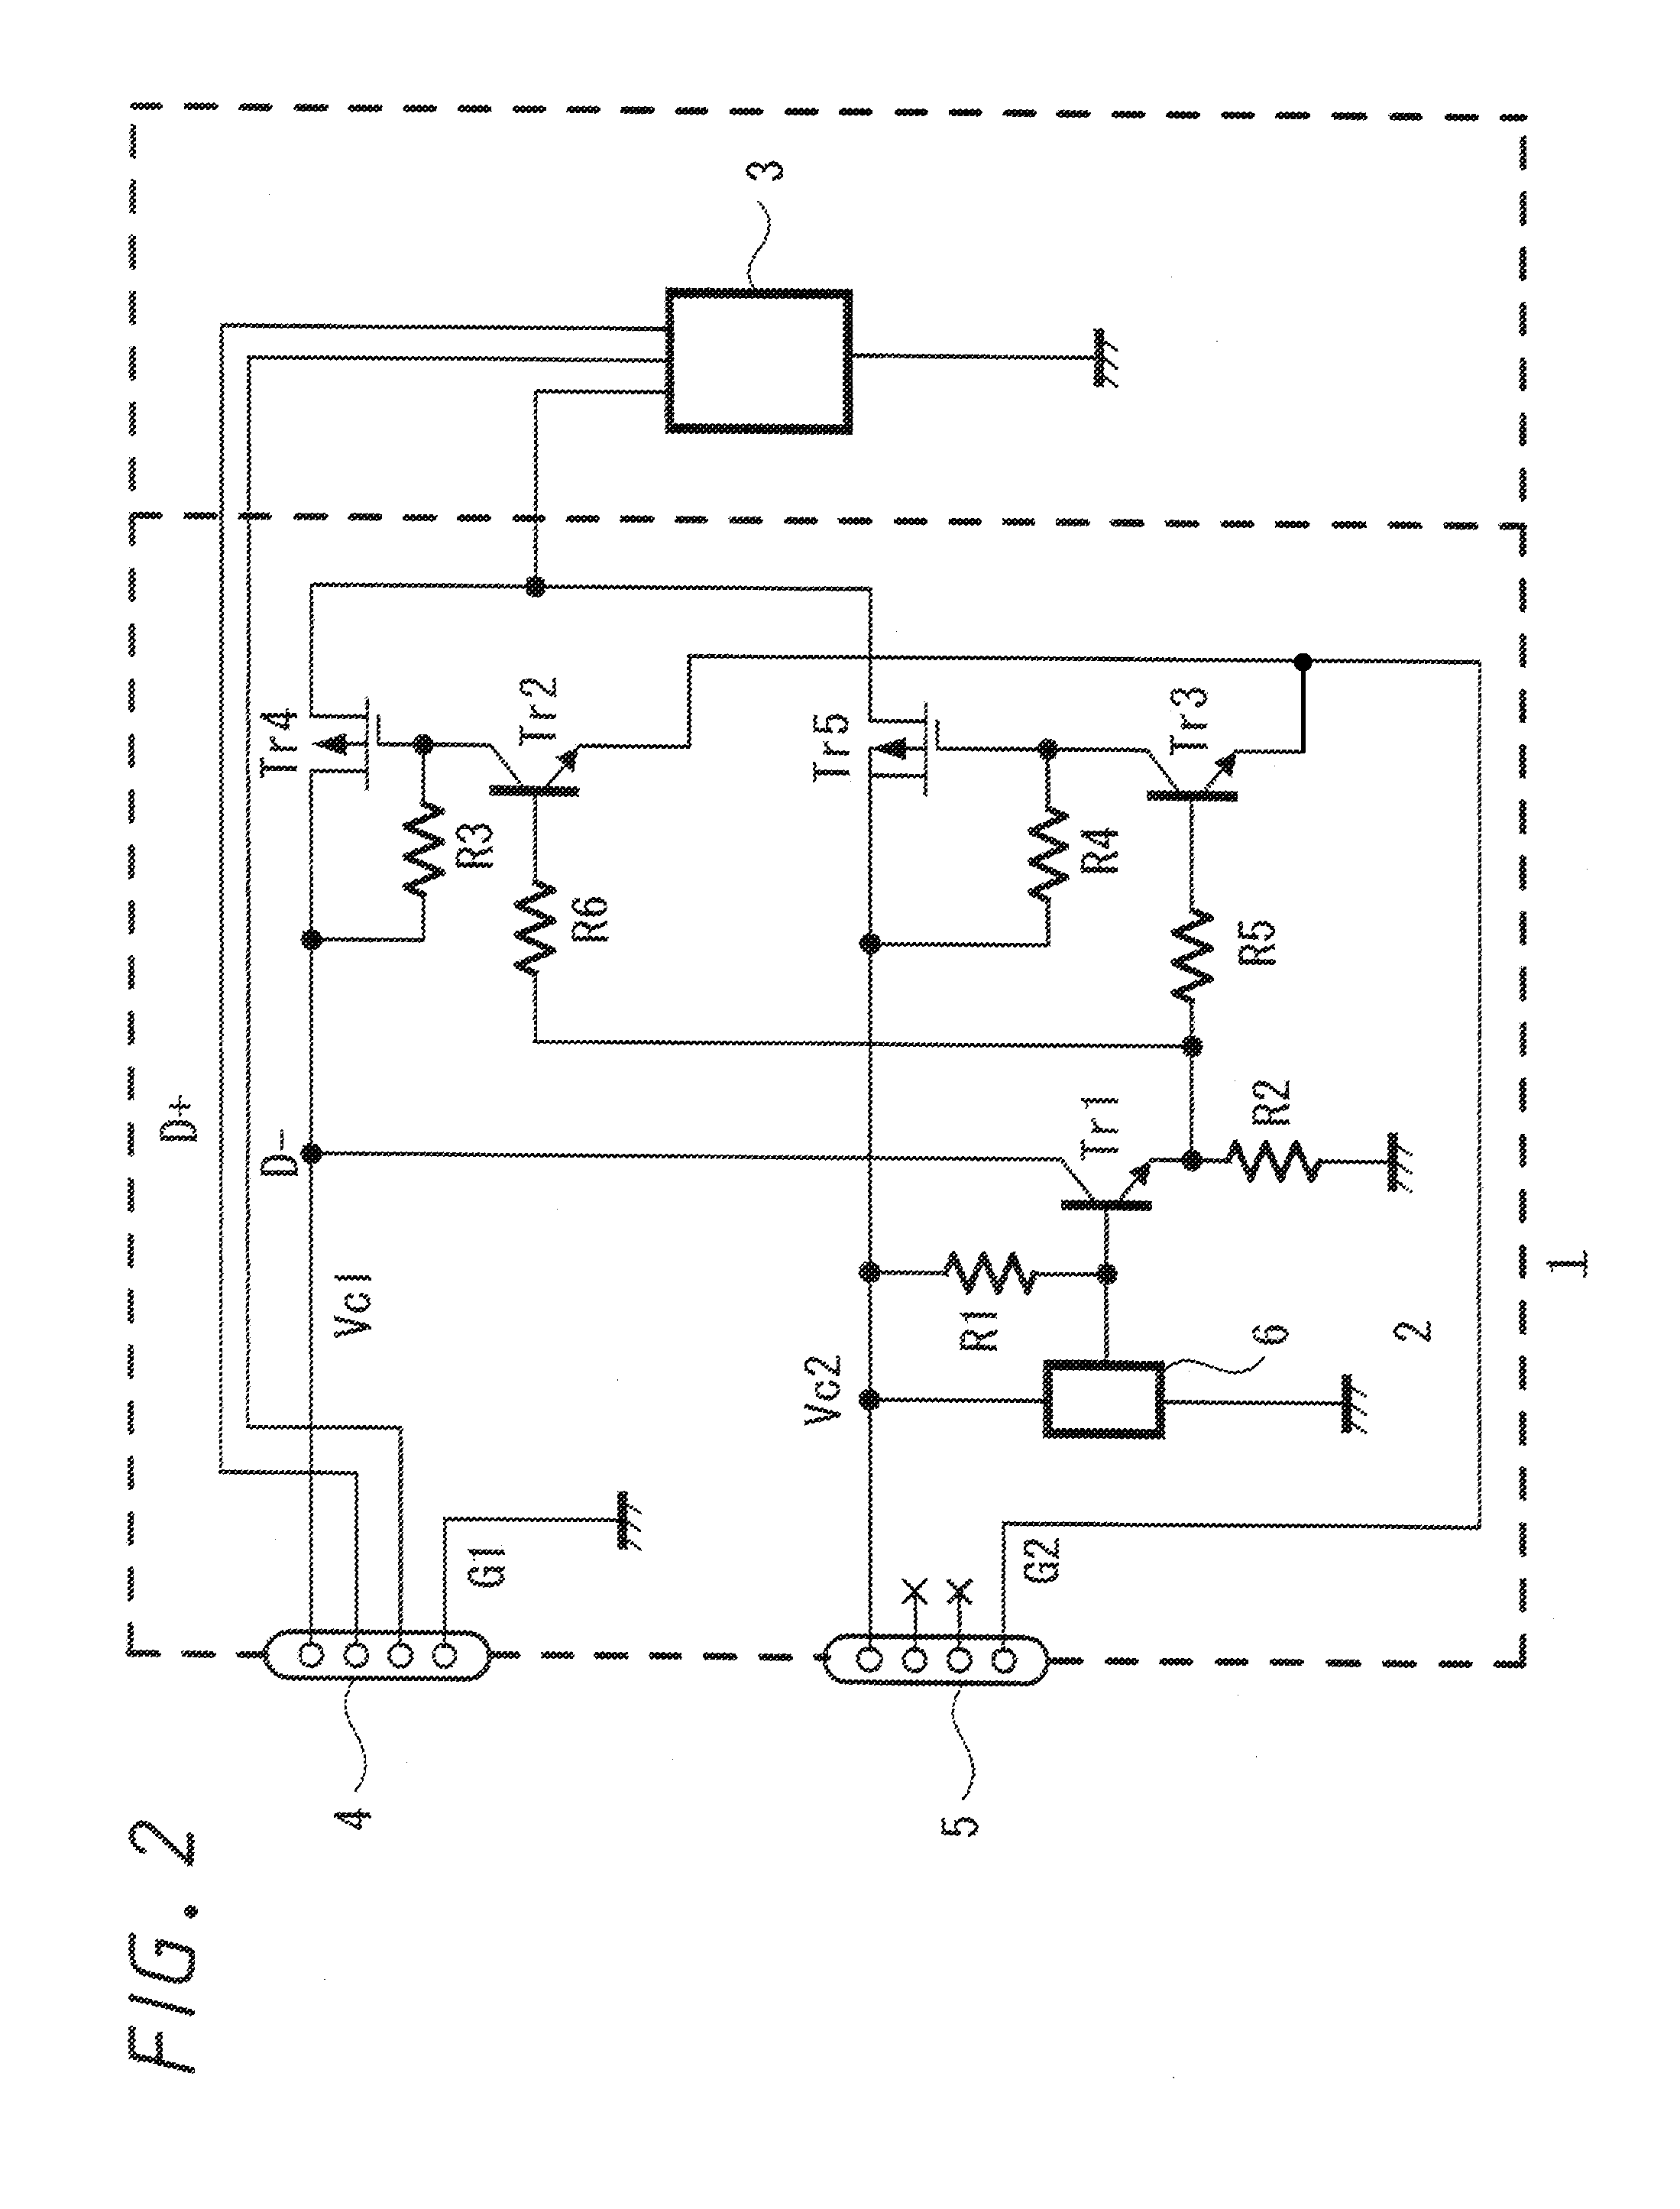 Electronic device including interface terminal and power supply cable connected thereto